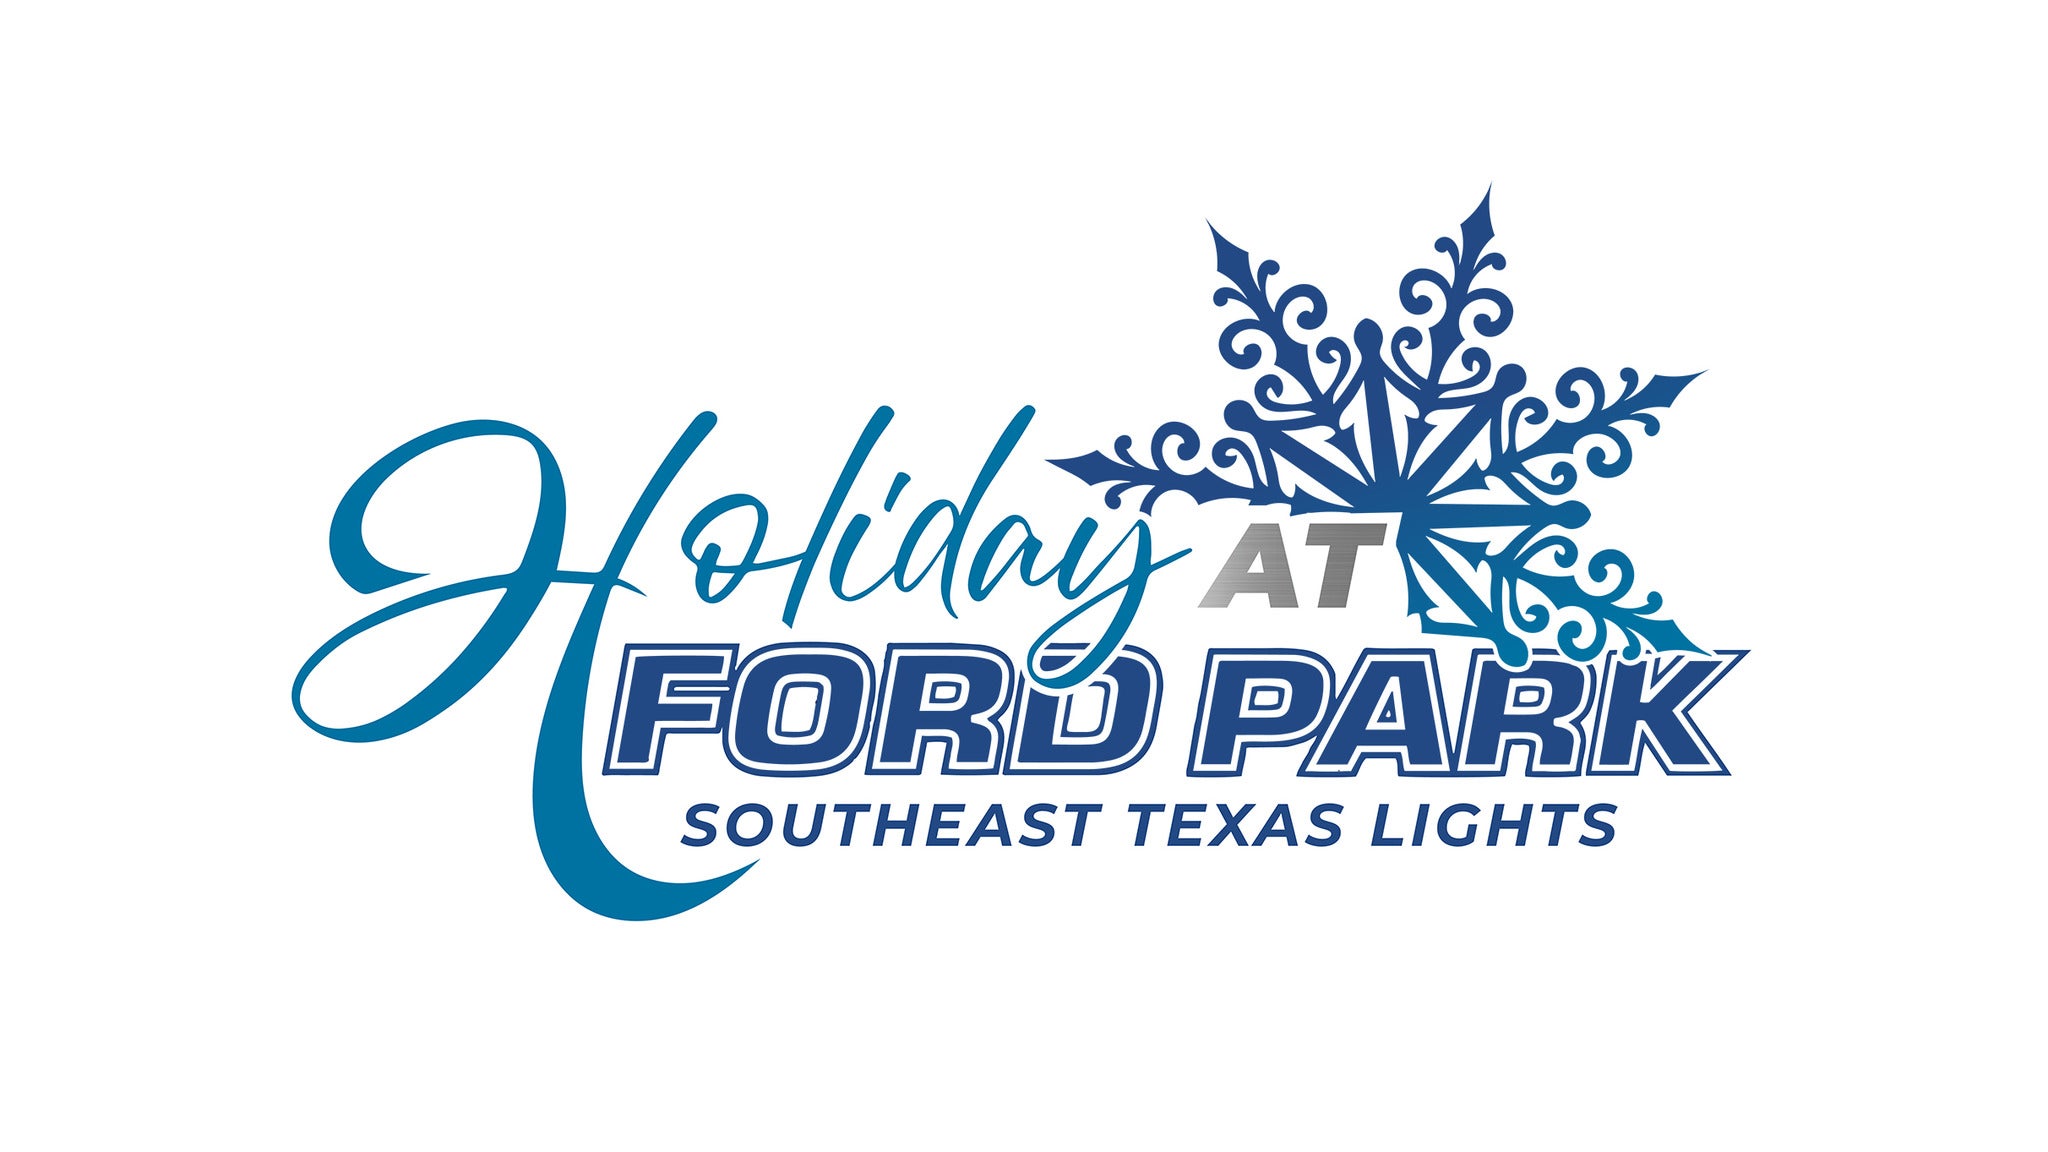 Holiday at Ford Park - Southeast Texas Lights in Beaumont promo photo for Black Friday Sale presale offer code